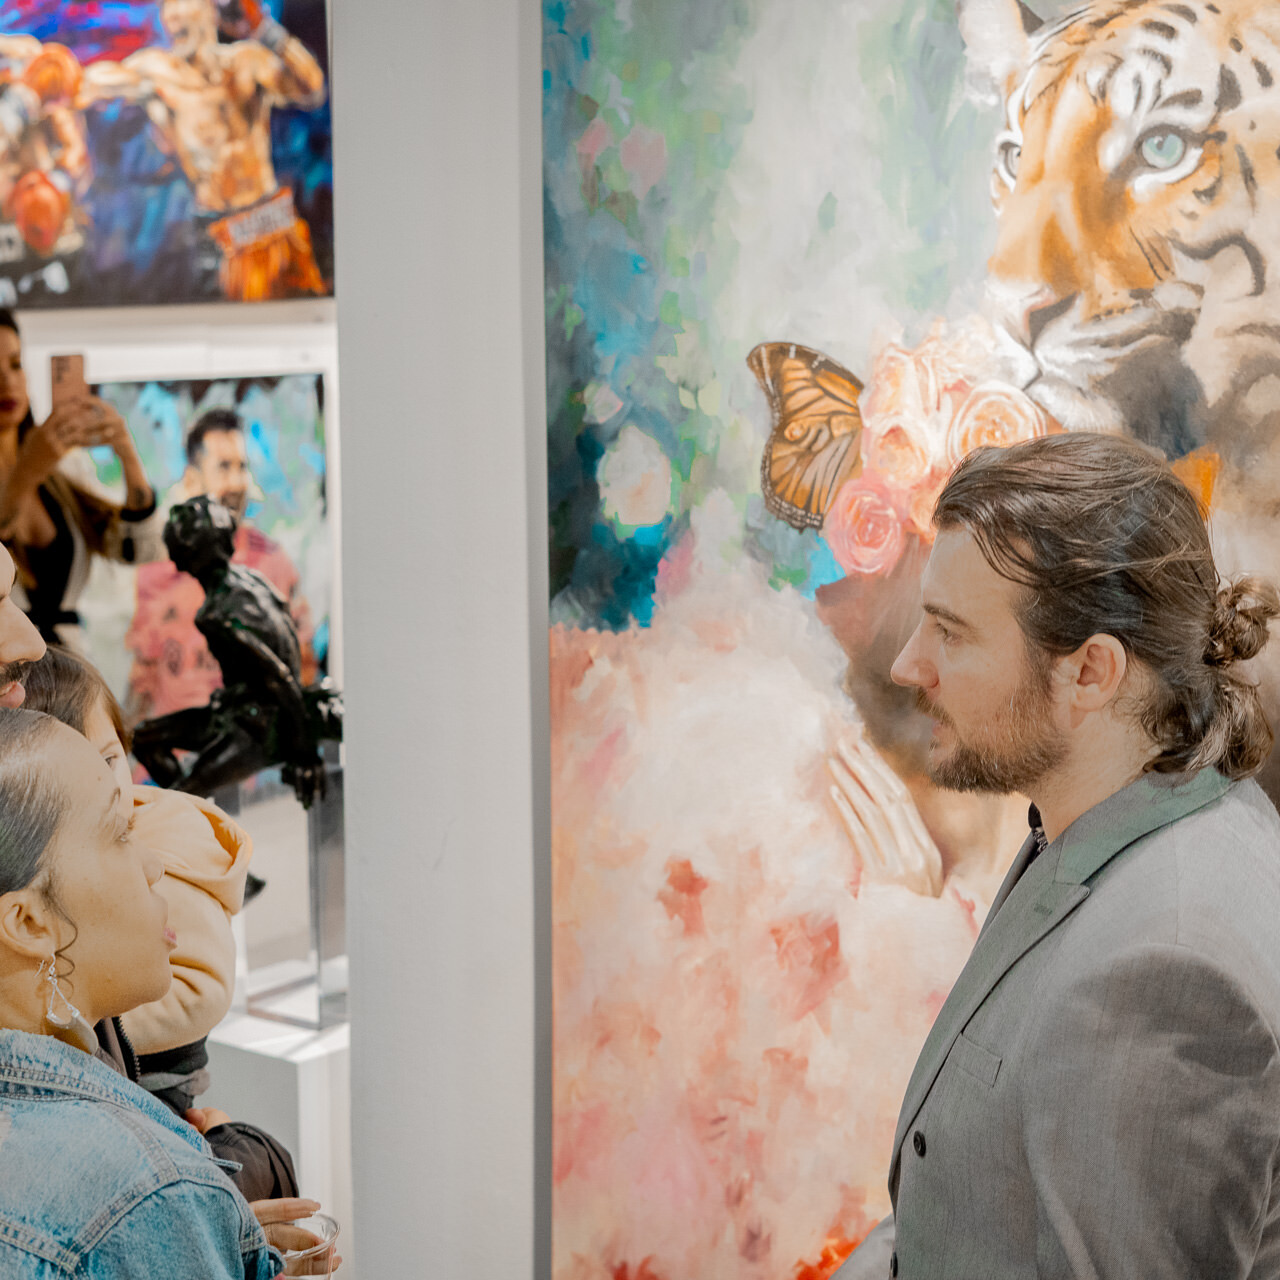 Visitors engage in conversation with artist Alex Righetto at Spectrum Miami, with the striking 'The Guardian' painting in view.